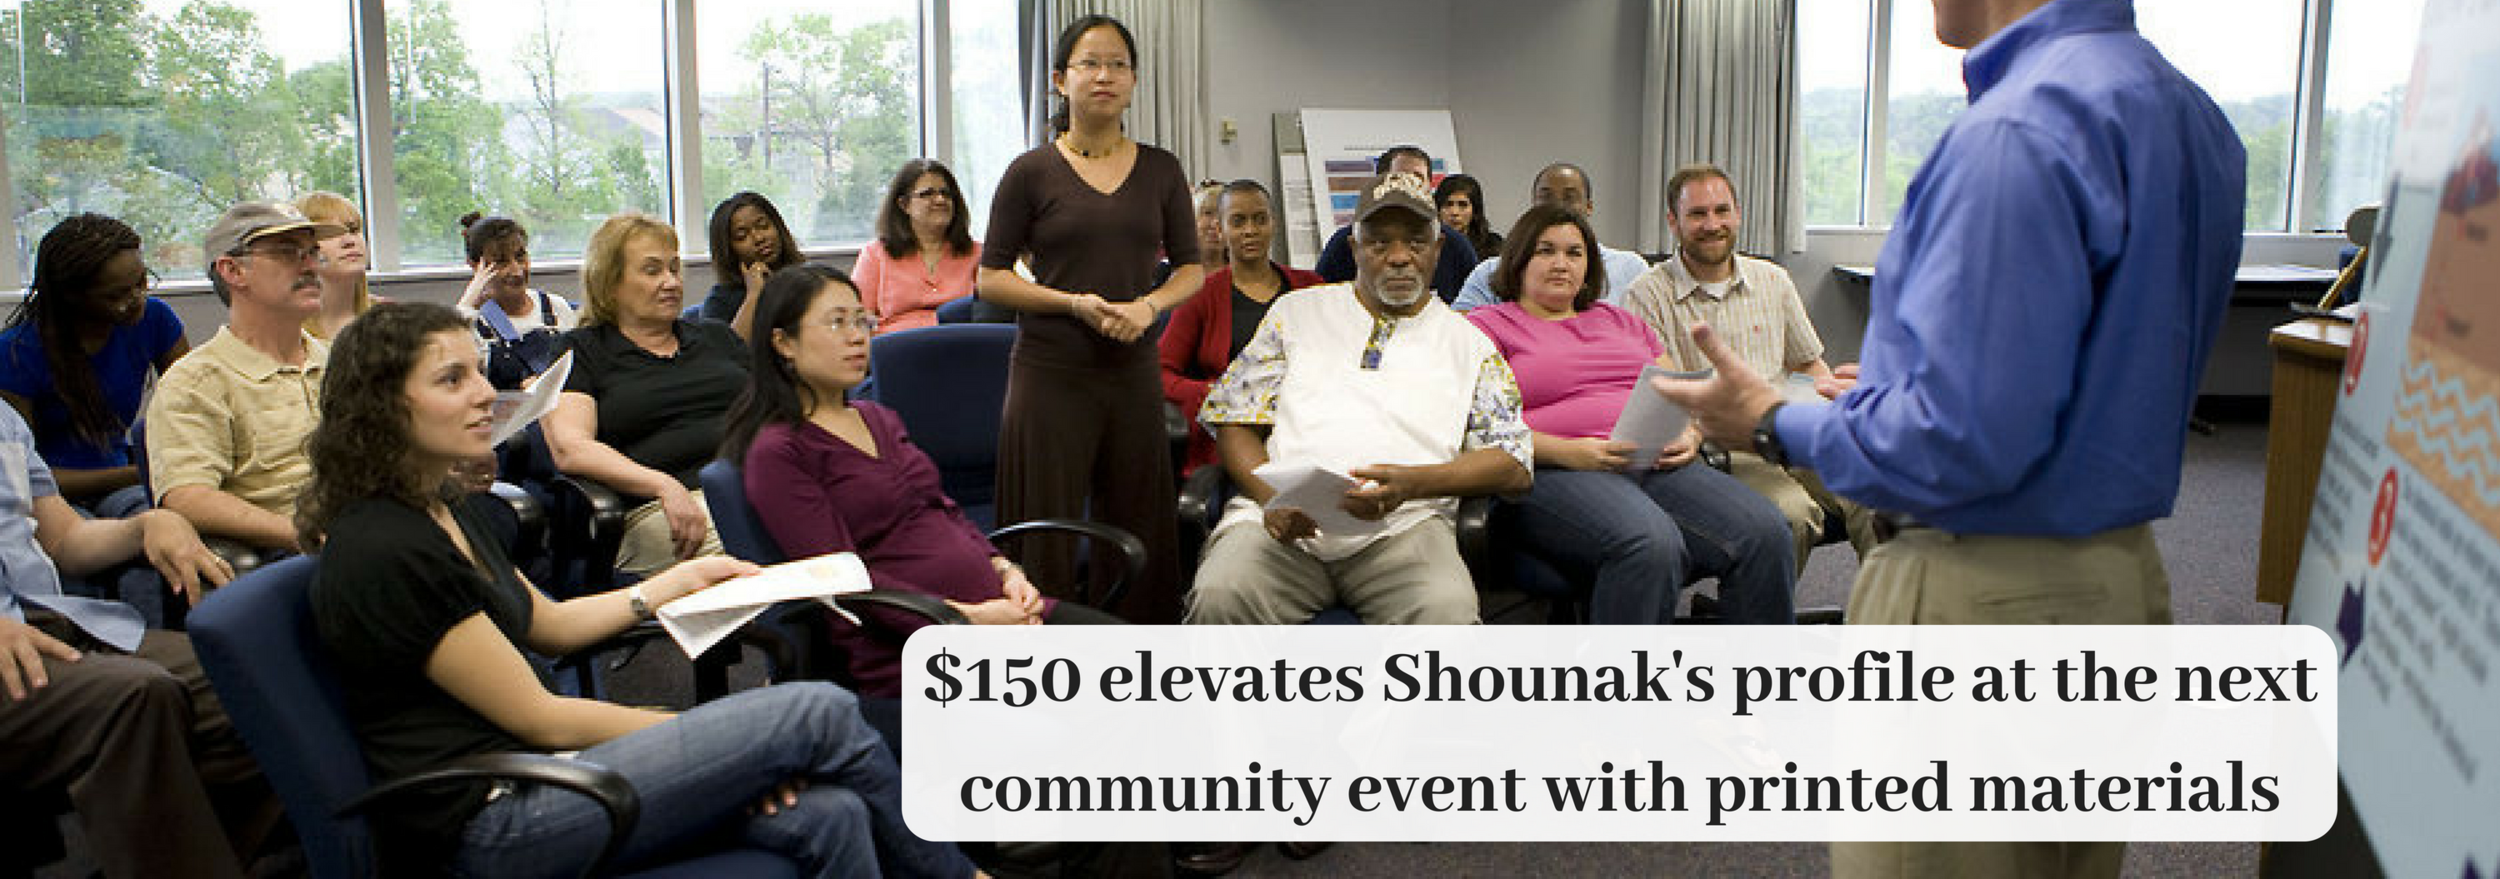 $150 elevates Shounak's profile at the next community event with flyers and a campaign presence (1).png